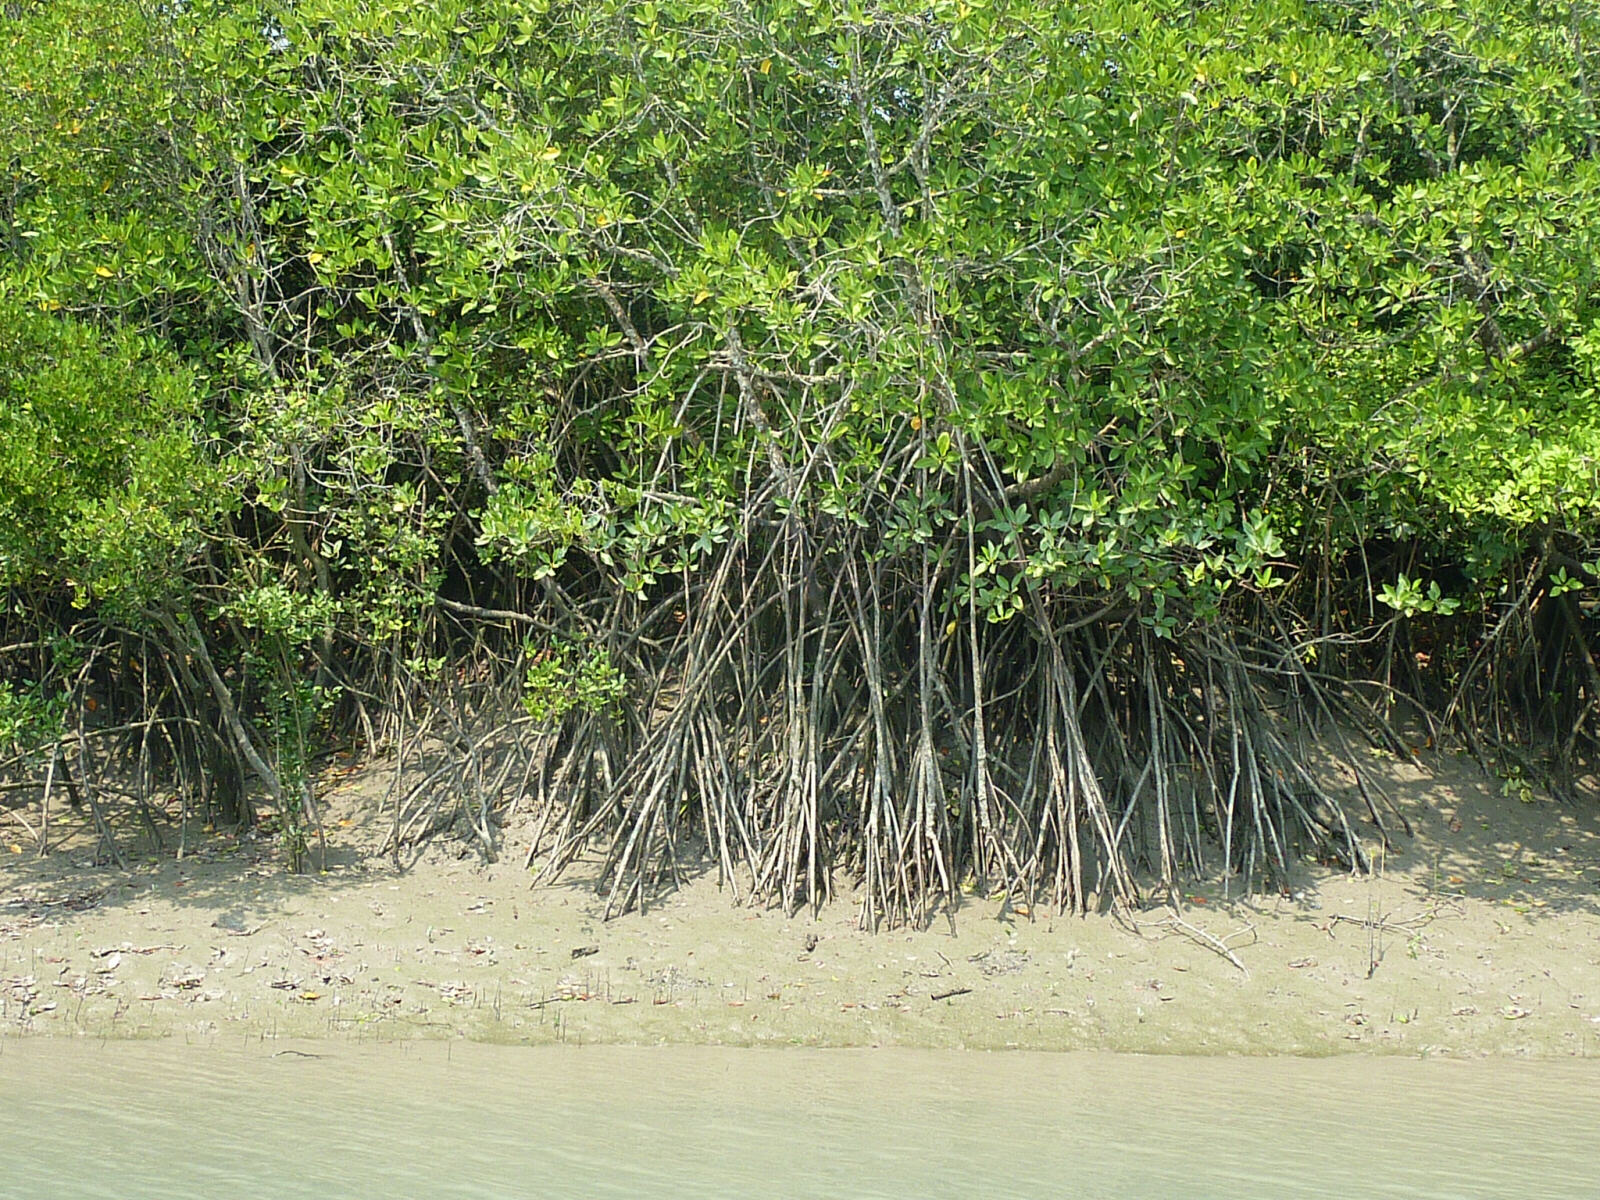 Mangrove forest in the Sundarbans, West Bengal